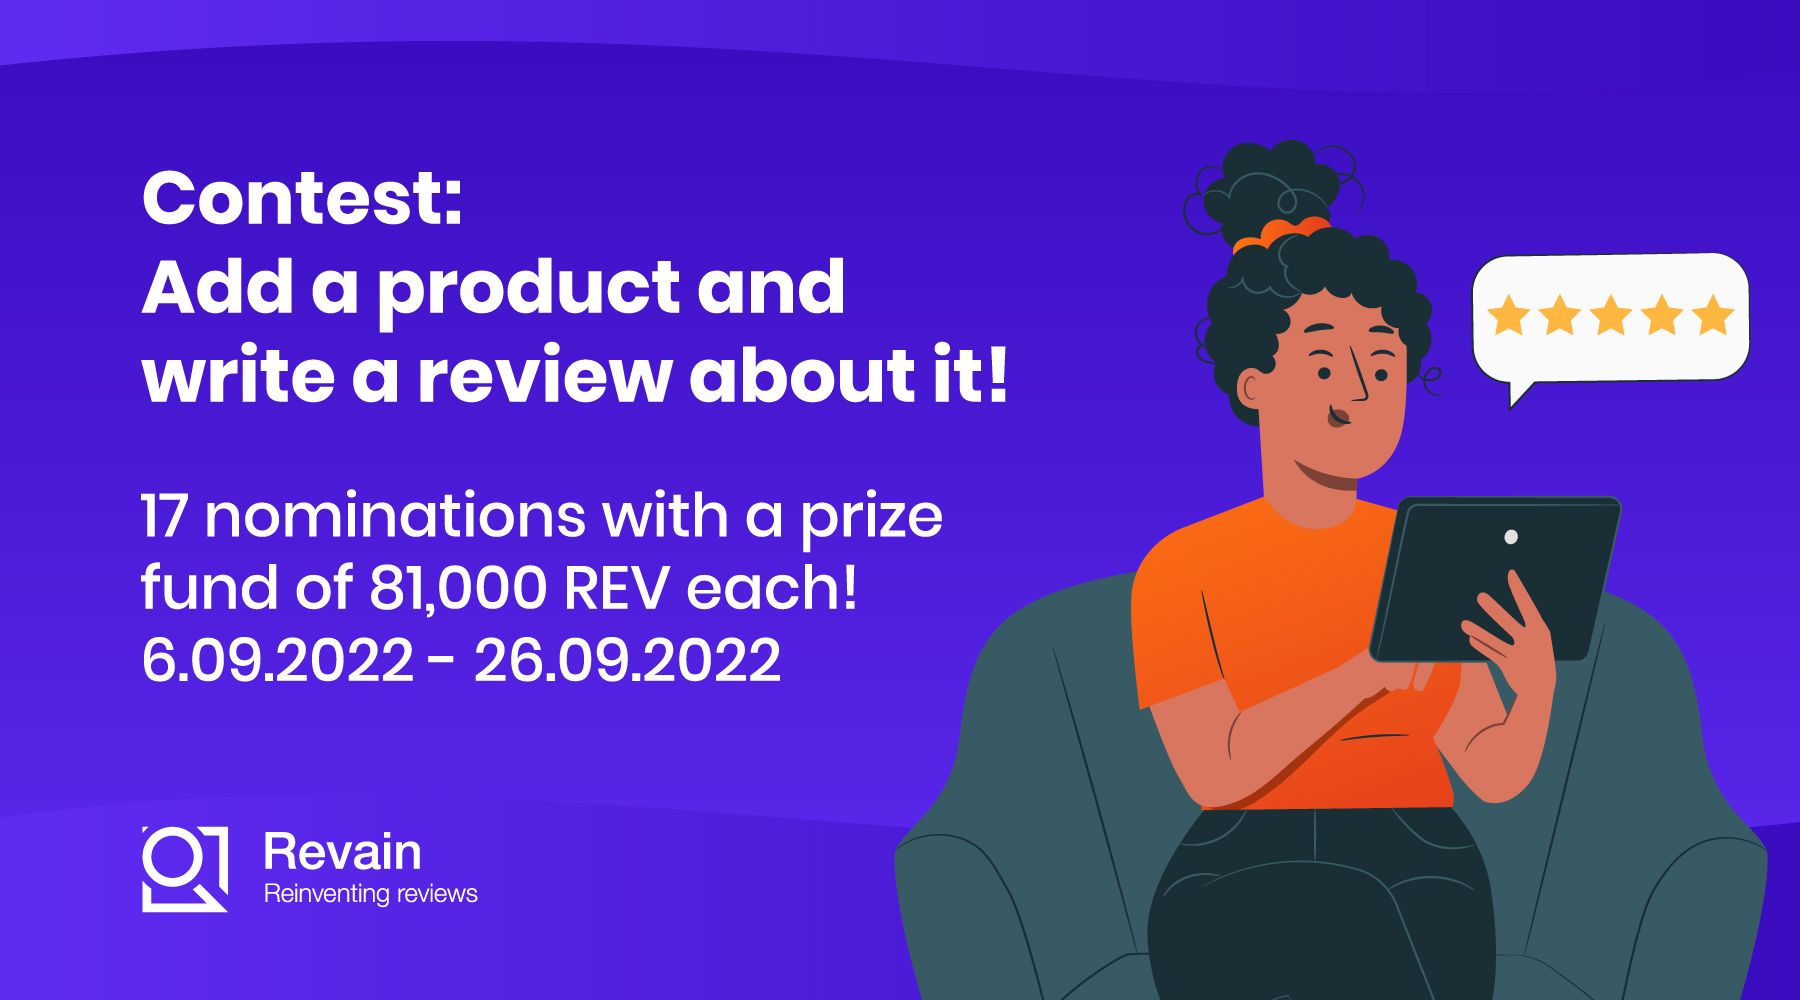 Contest: Add your product and write a review about it!